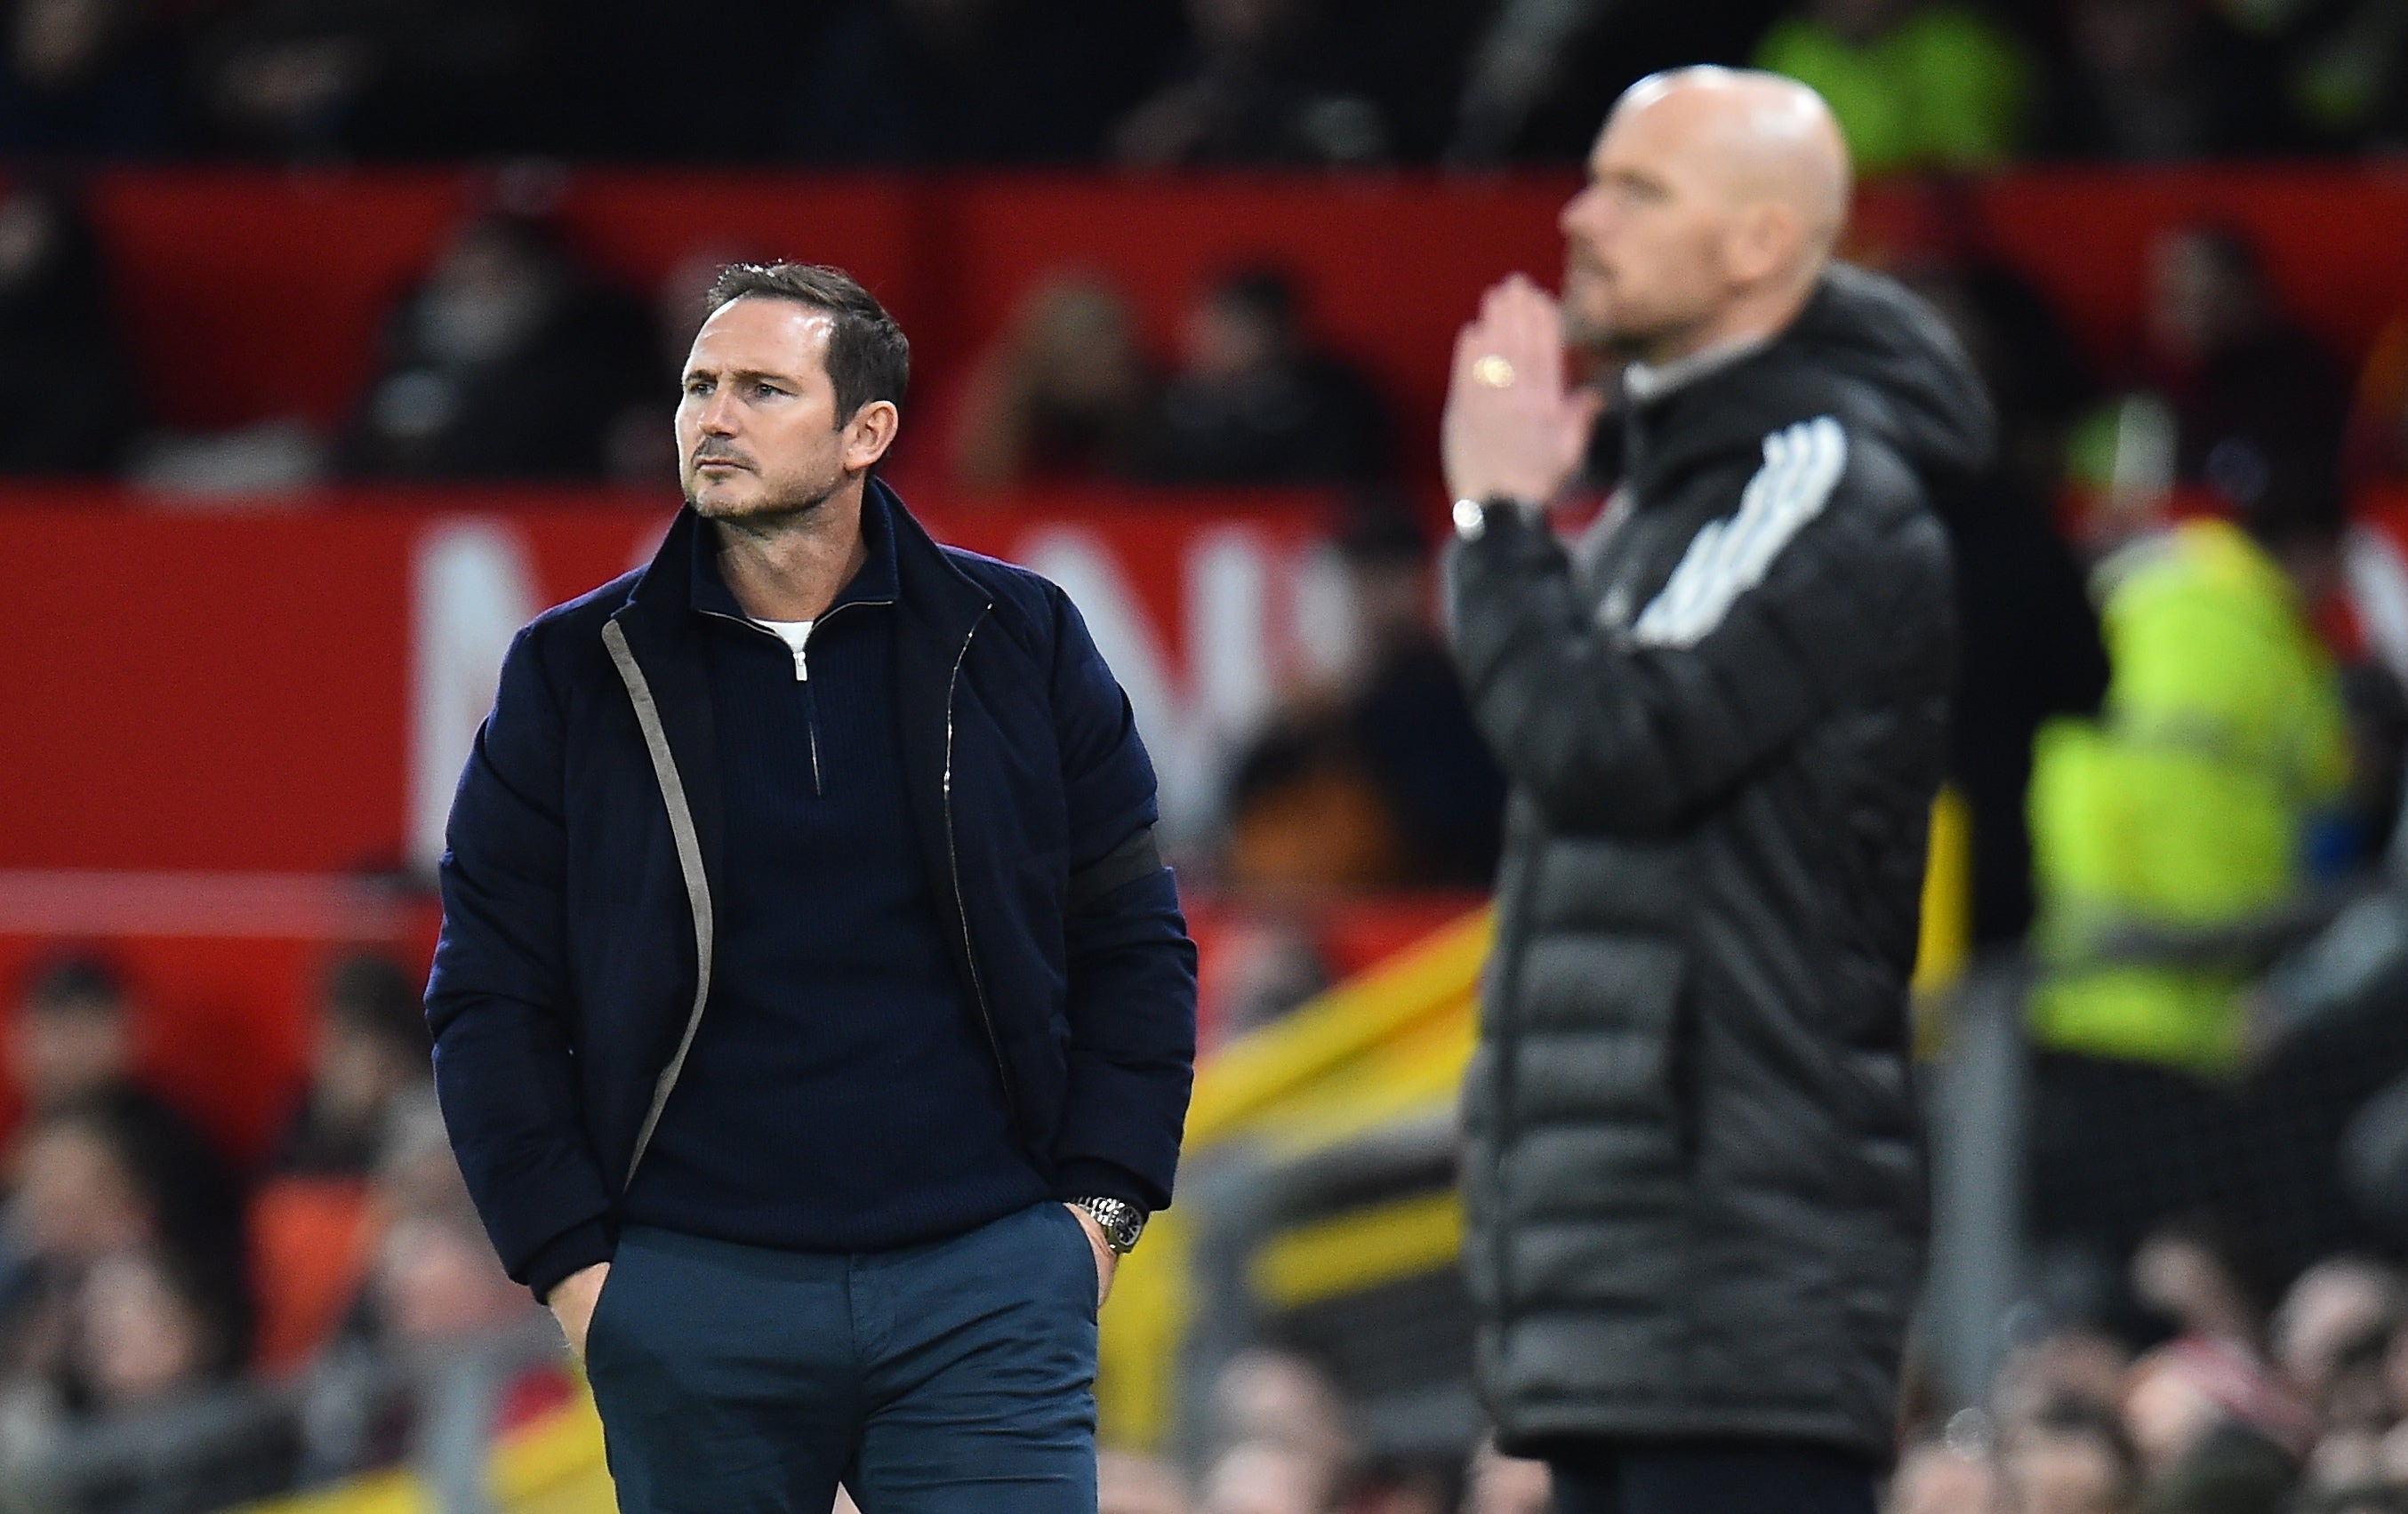 Everton manager Frank Lampard on the touchline at Old Trafford